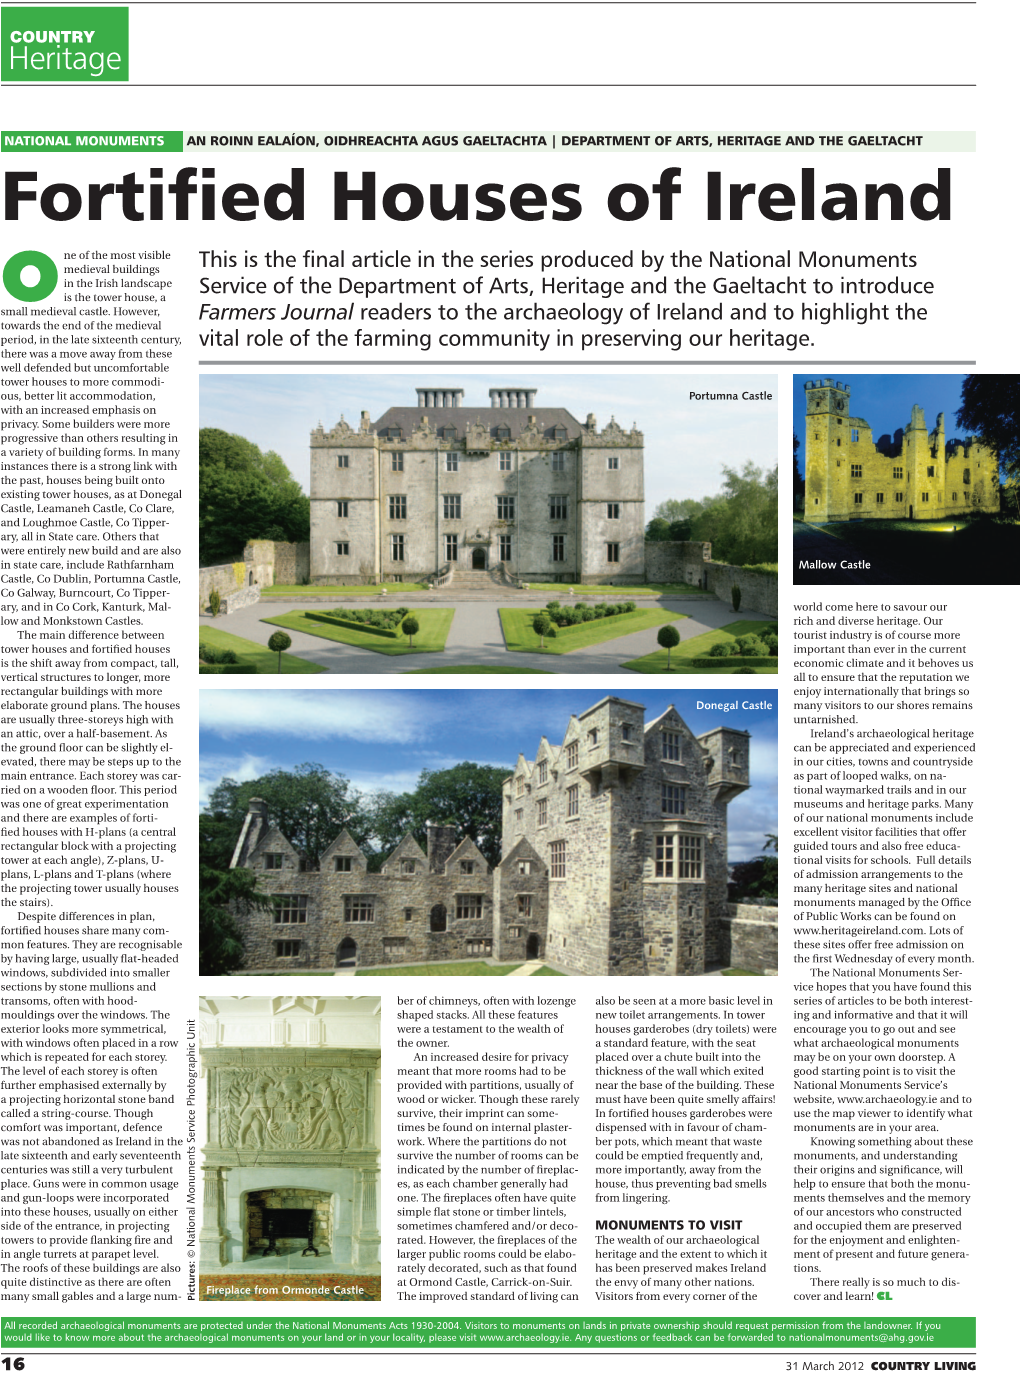 Fortified Houses of Ireland